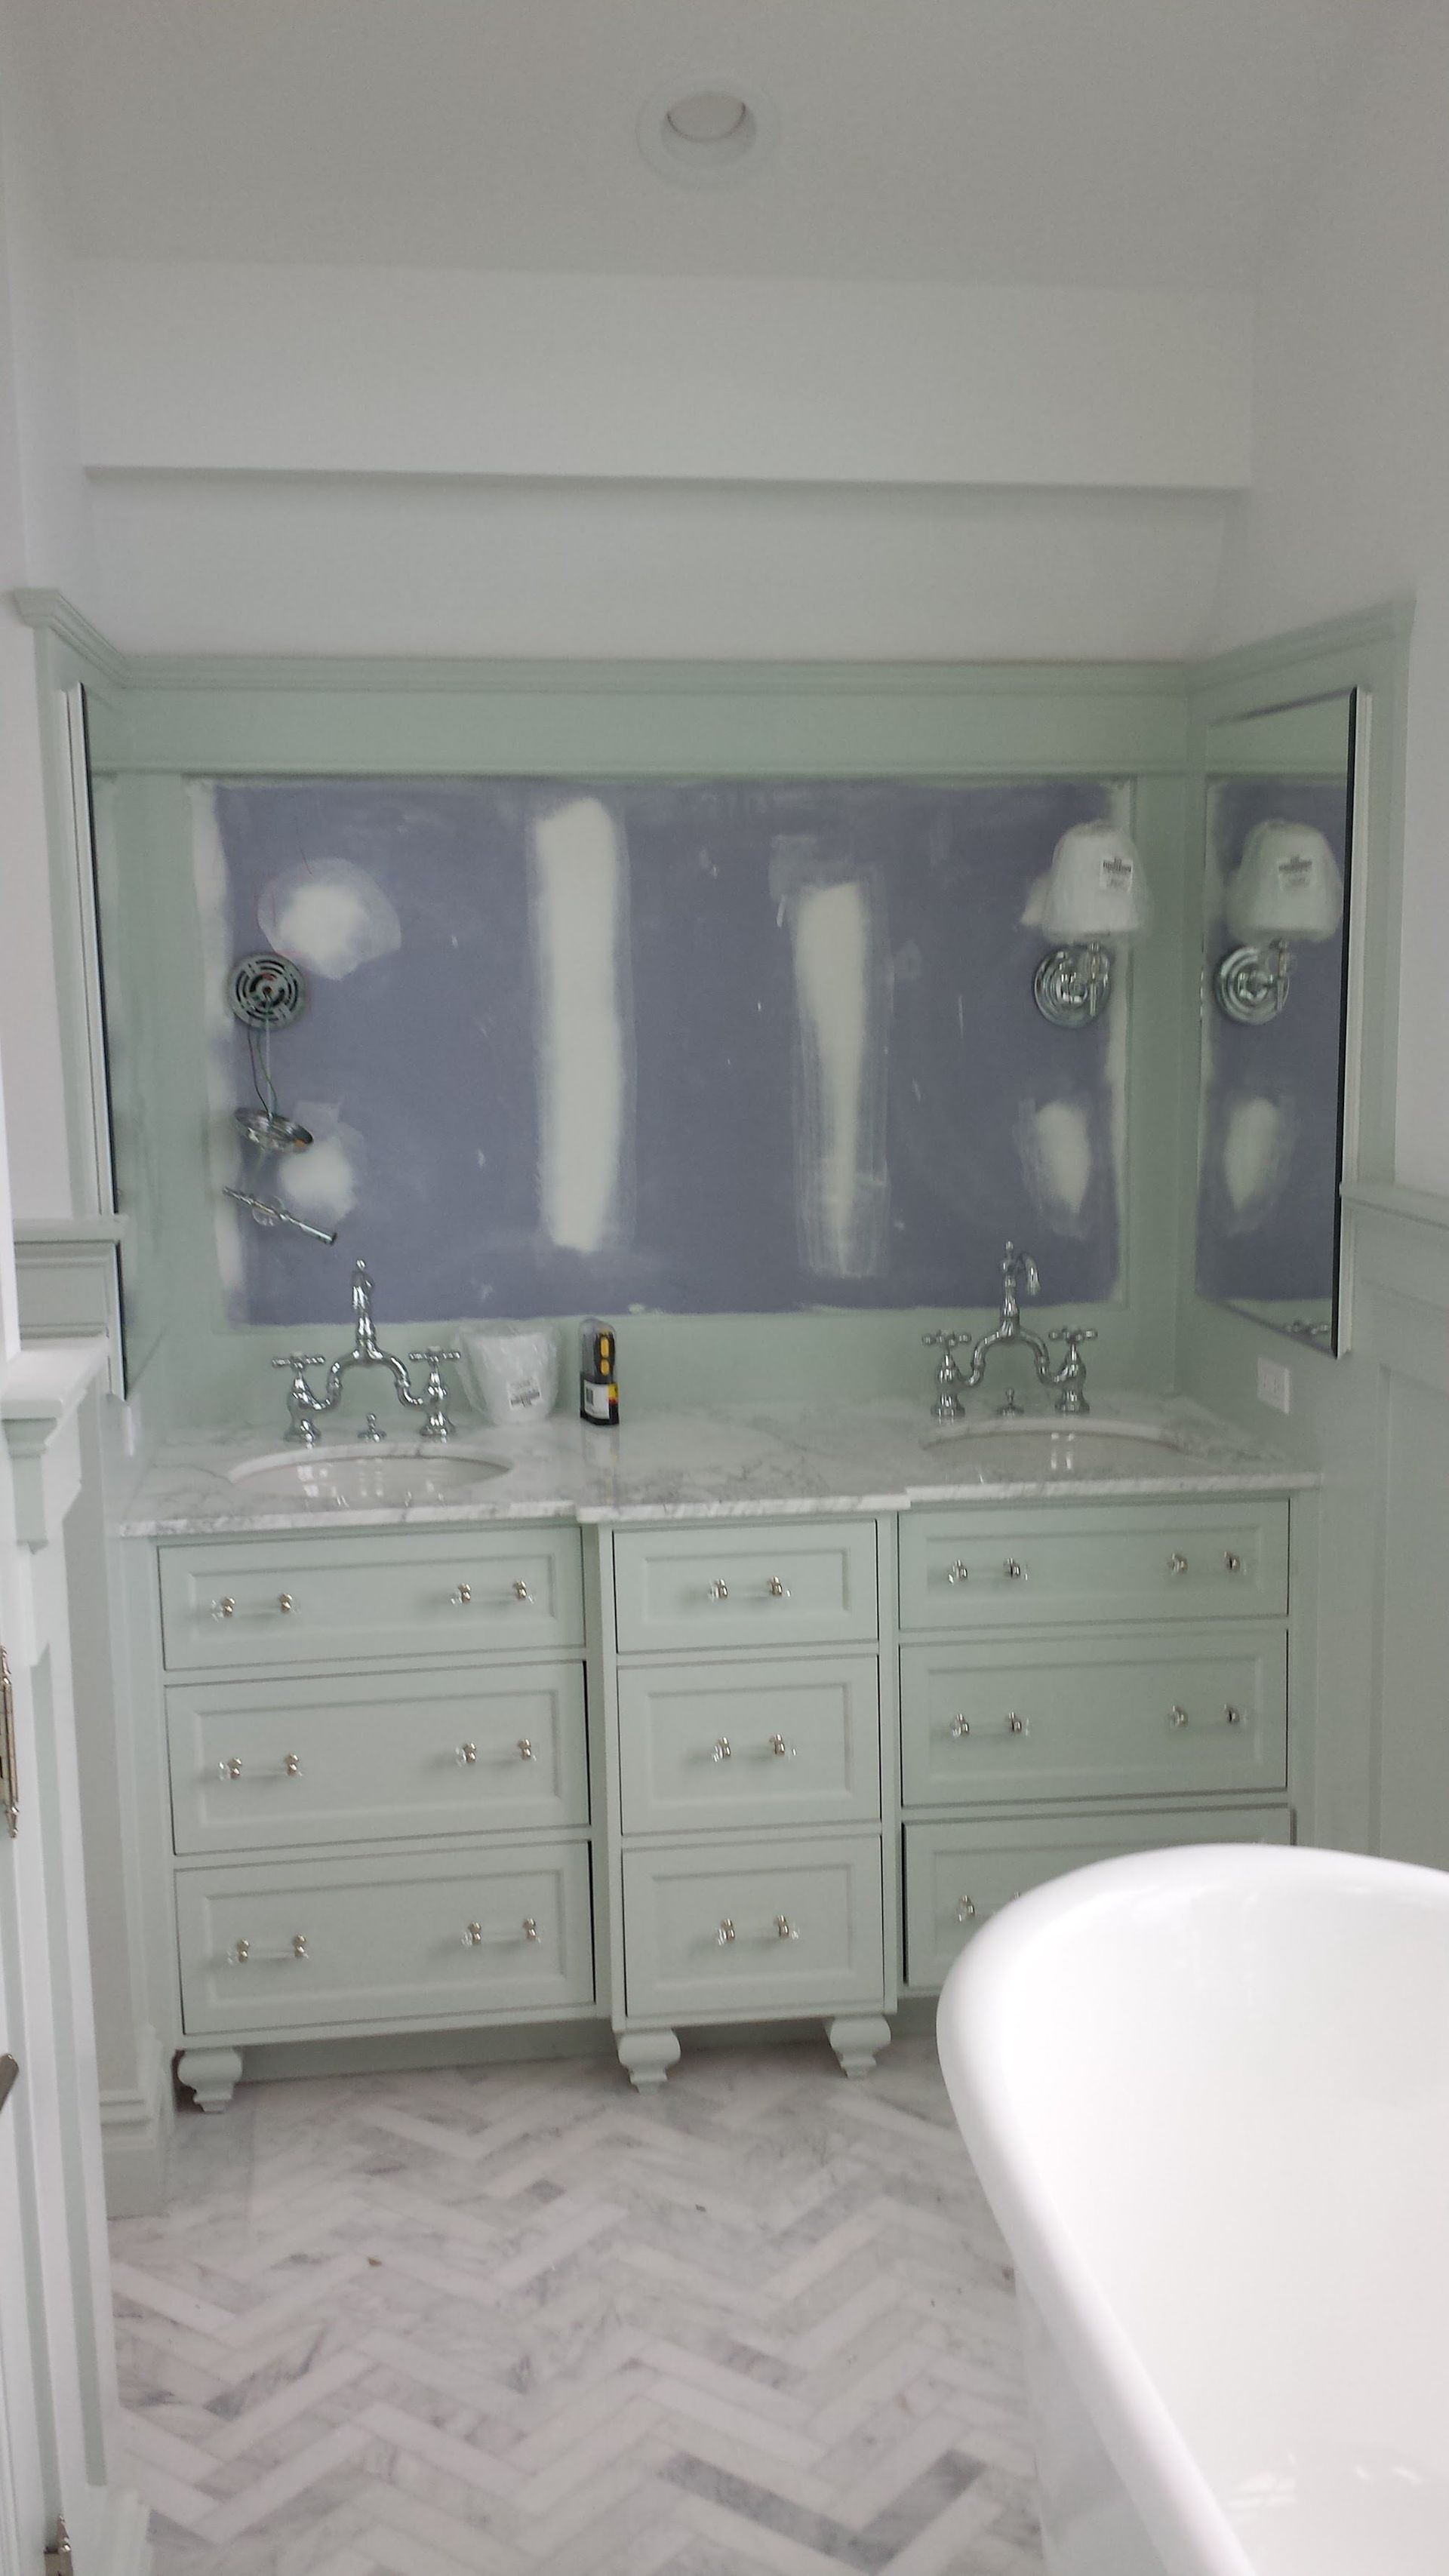 bathroom remodeling contractors in st. james. ny